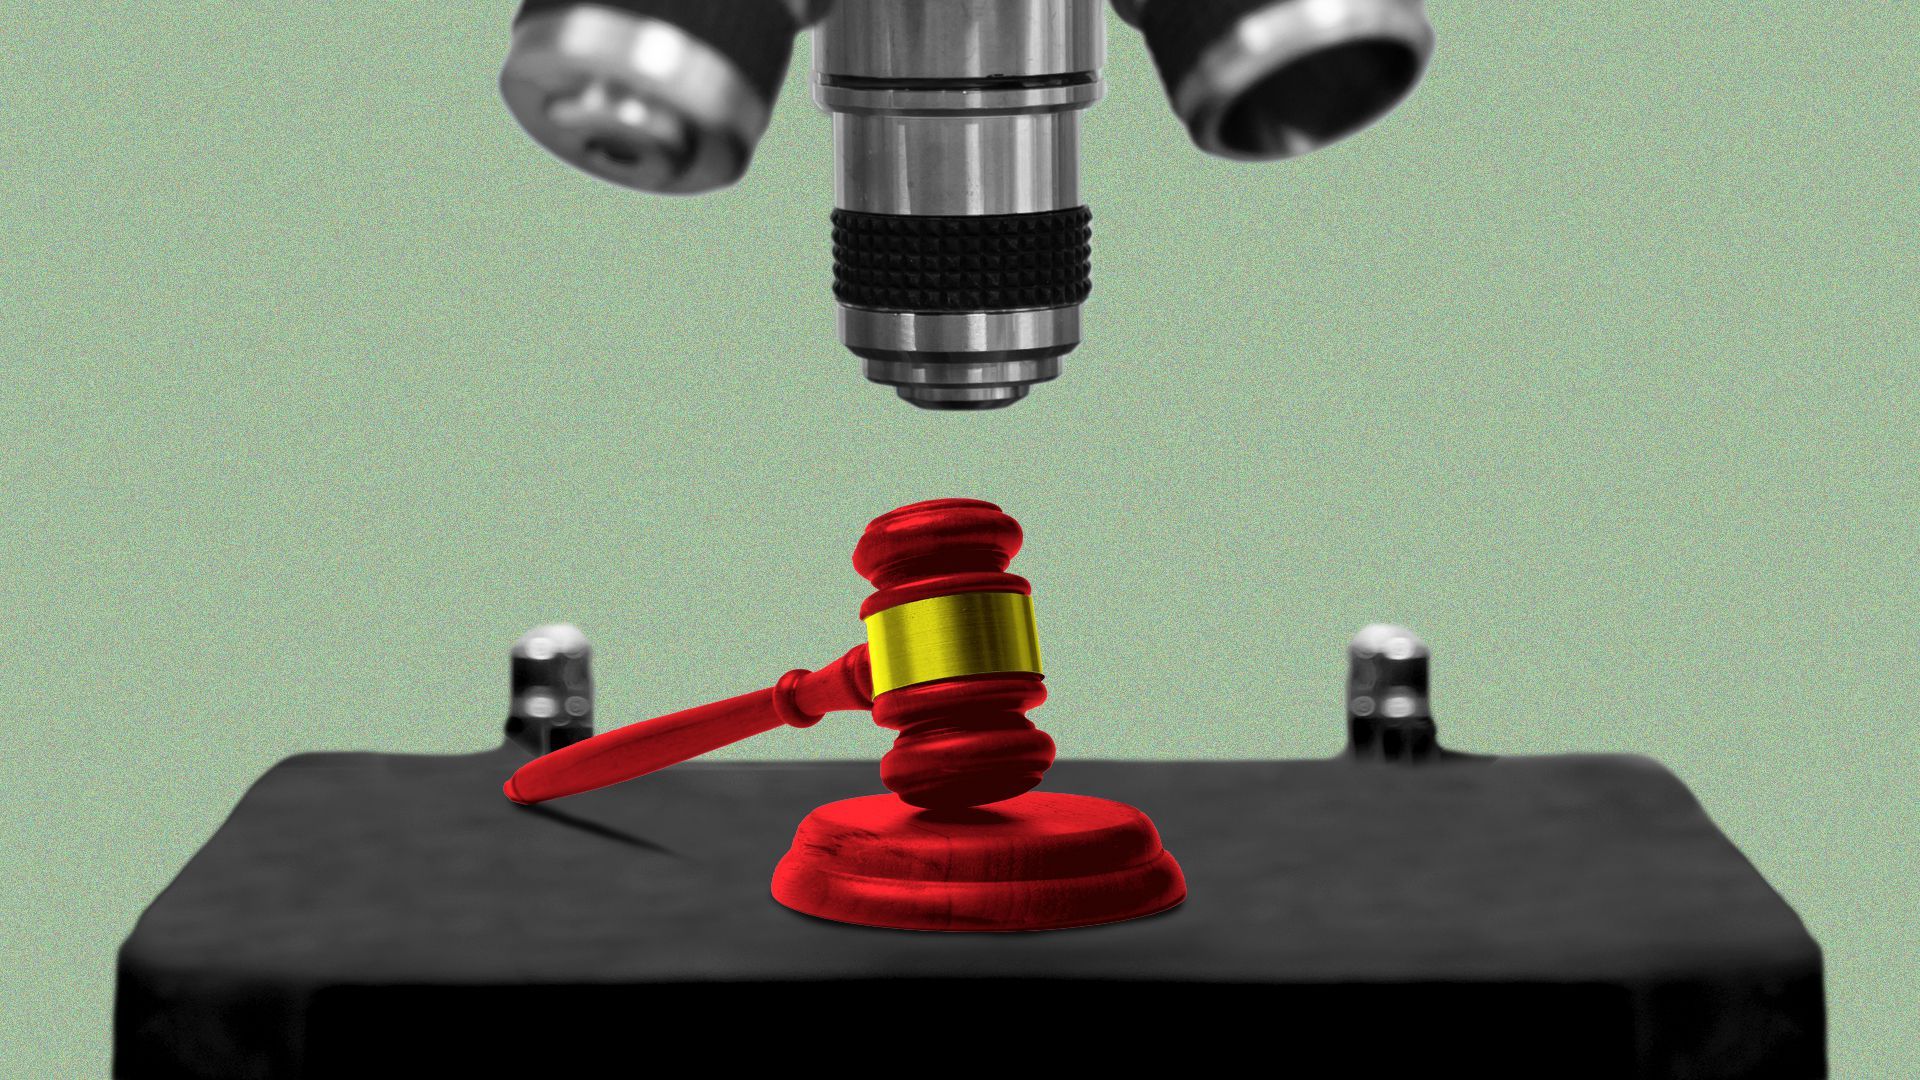 Illustration of a gavel under a microscope.